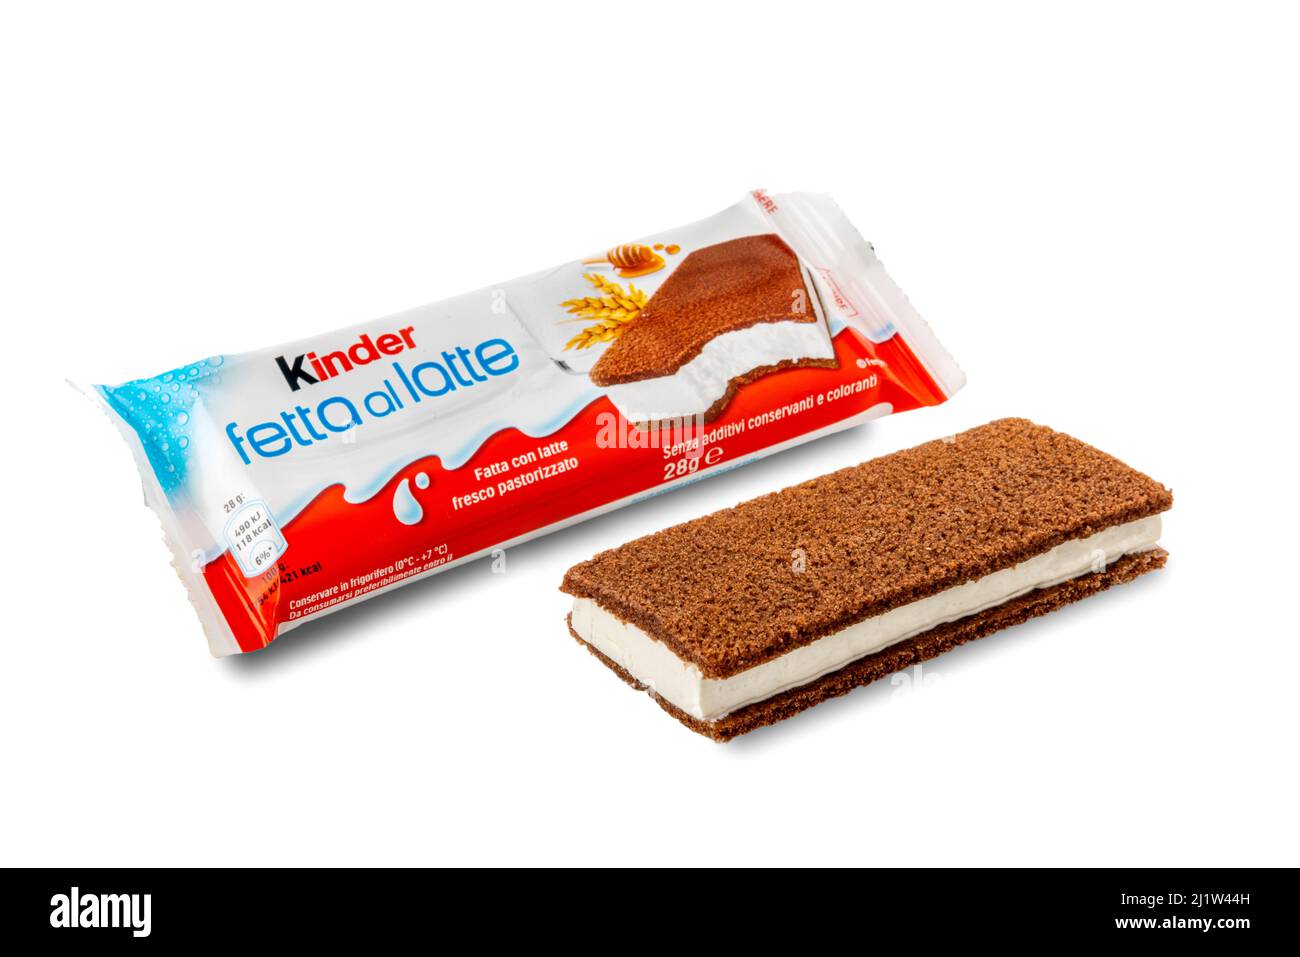 Alba, Italy - March 28, 2022: package of Kinder fetta al latte Ferrero,  snack sponge cake filled with creamy milk and honey, produced by Ferrero  impo Stock Photo - Alamy